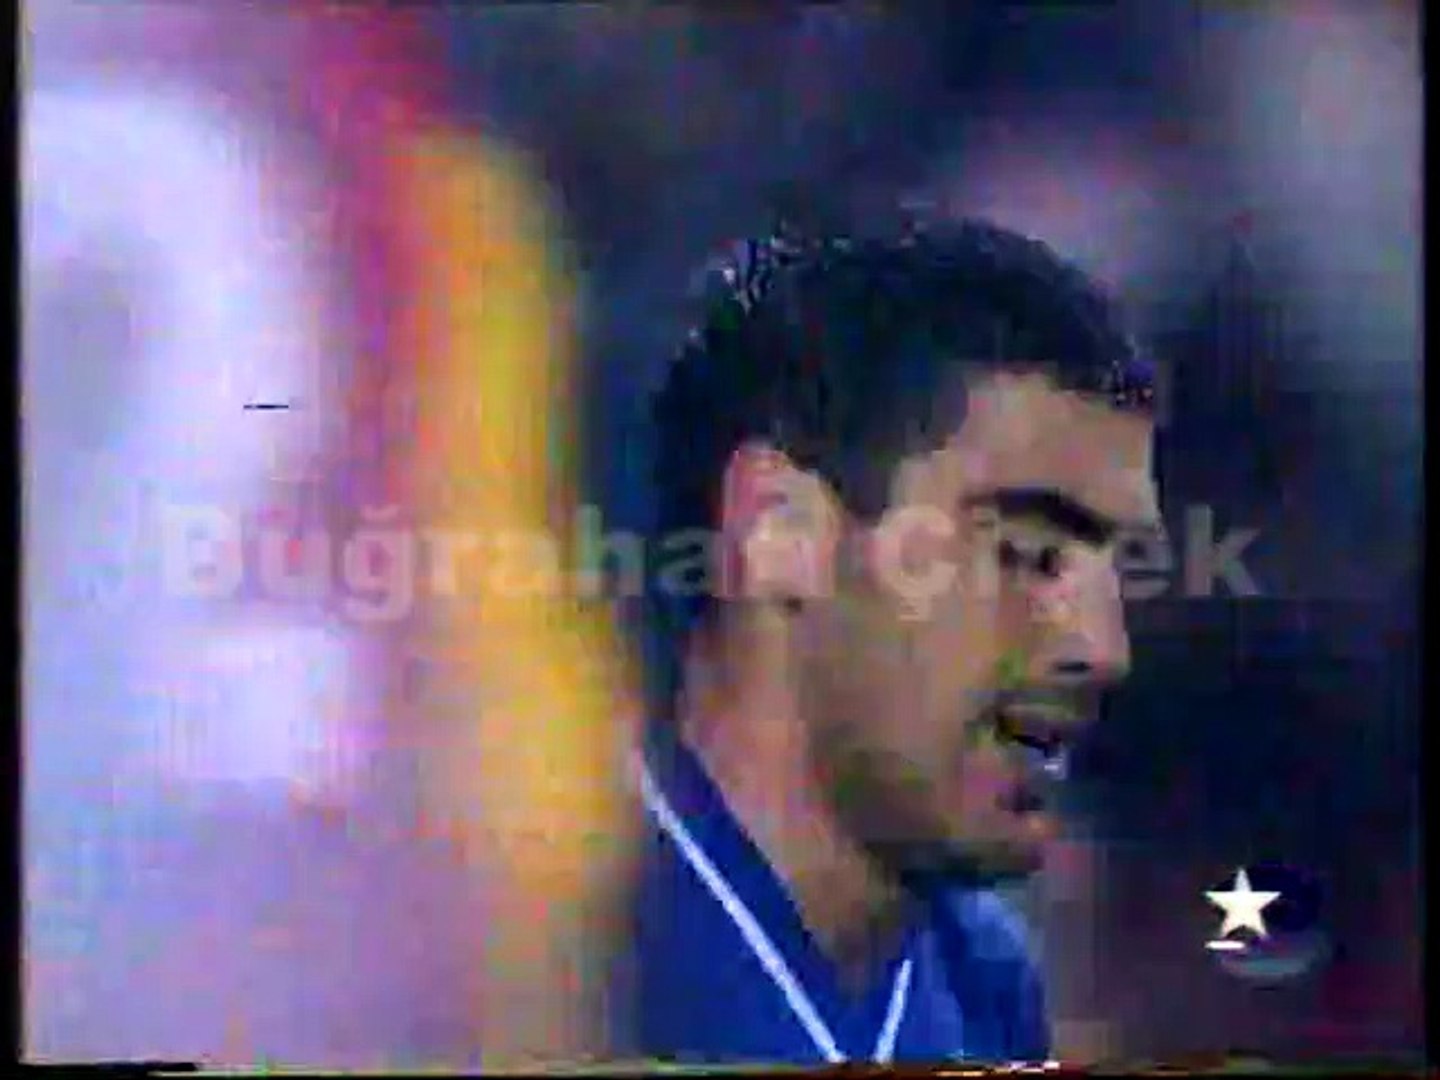 Glasgow Rangers 0-0 Galatasaray 17.10.2000 - 2000-2001 UEFA Champions  League Group D Matchday 4 - Dailymotion Video